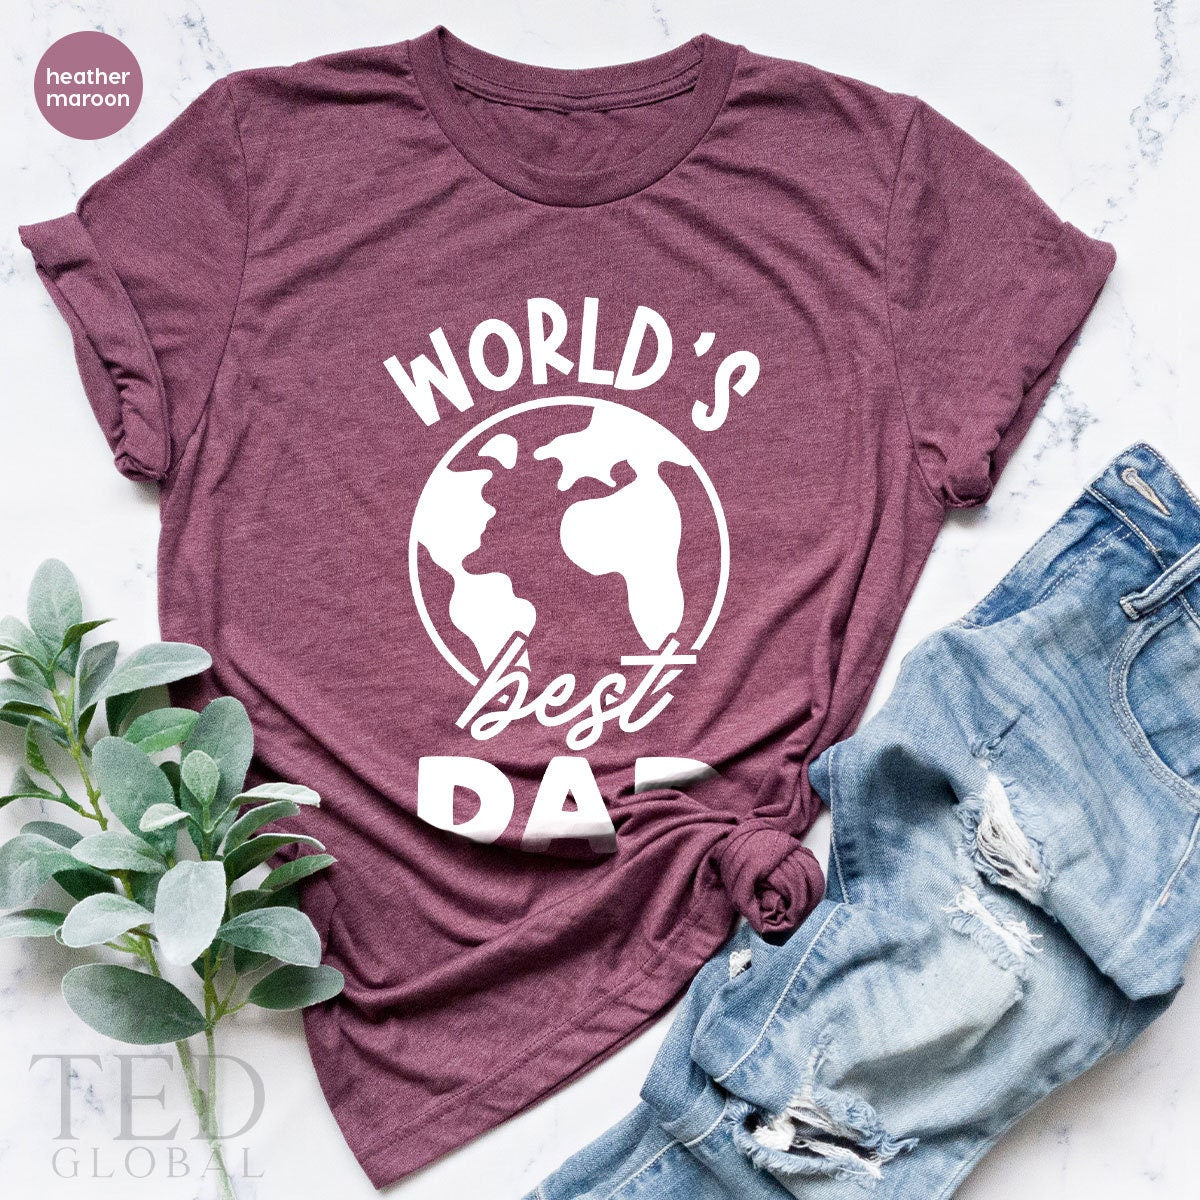 Worlds Best Dad Shirt, Best Dad Shirt, Fathers Day T Shirt, Cool Father Shirt, Super Father Shirt, Funny Daddy TShirt, Gift For Father - Fastdeliverytees.com